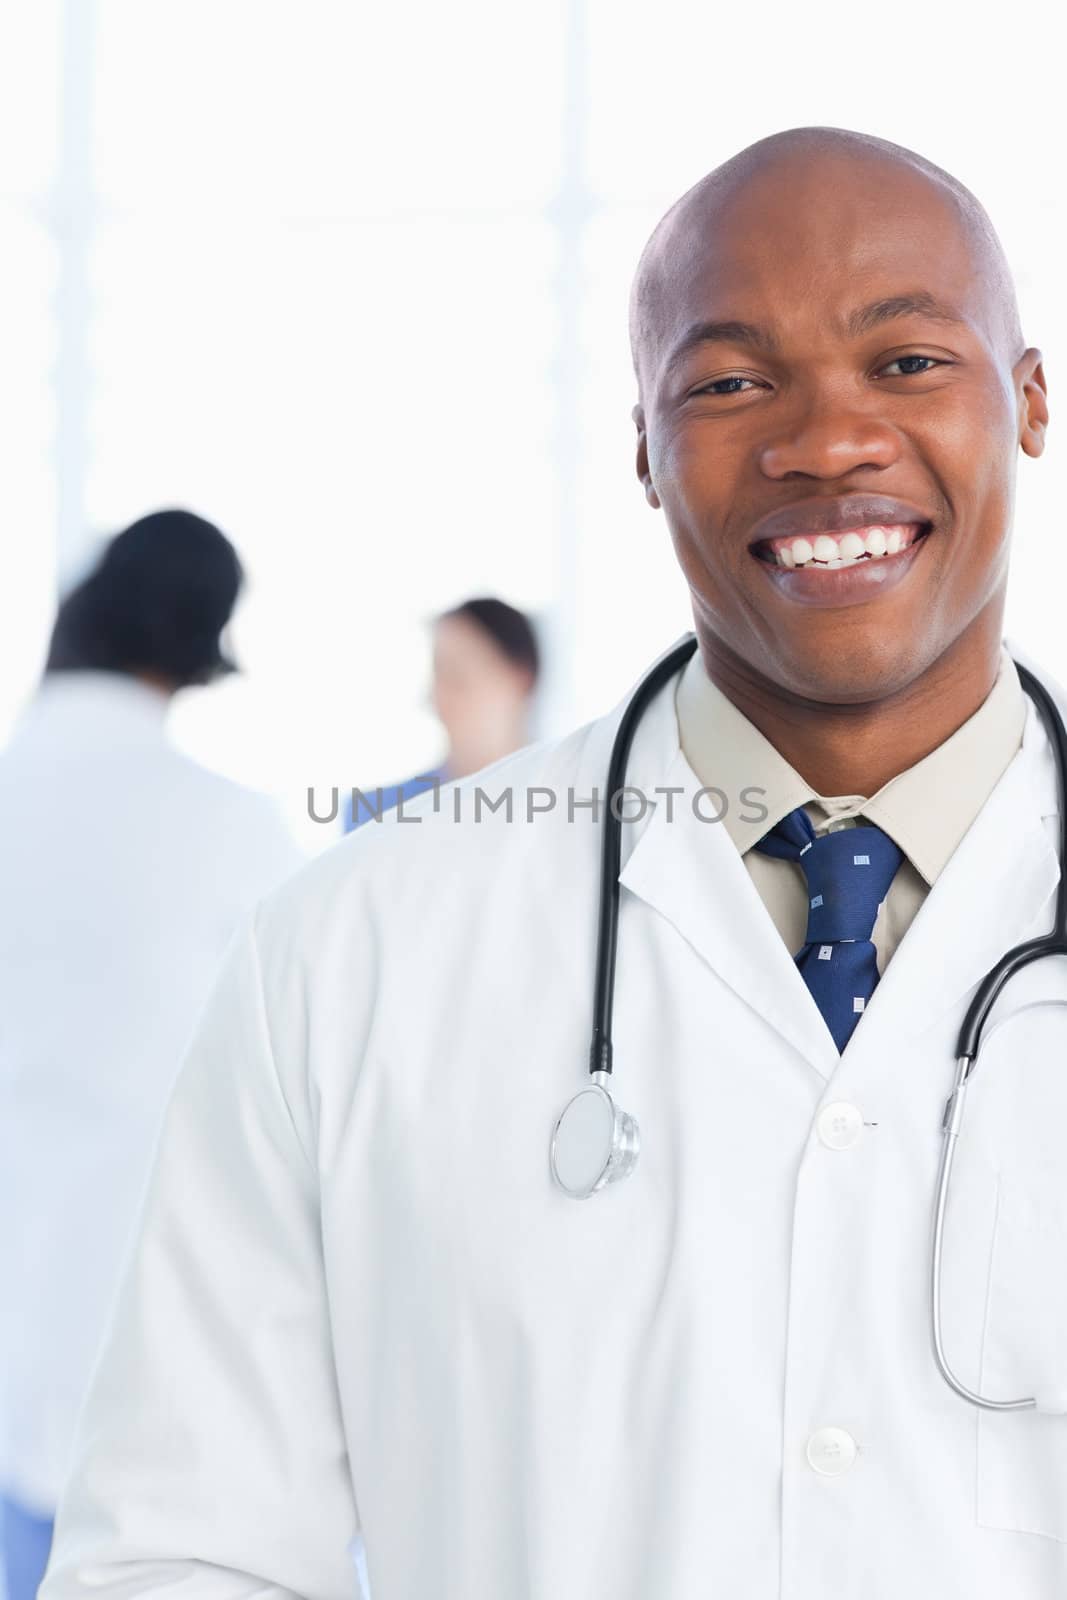 Young intern showing a beaming smile in front of his medical team